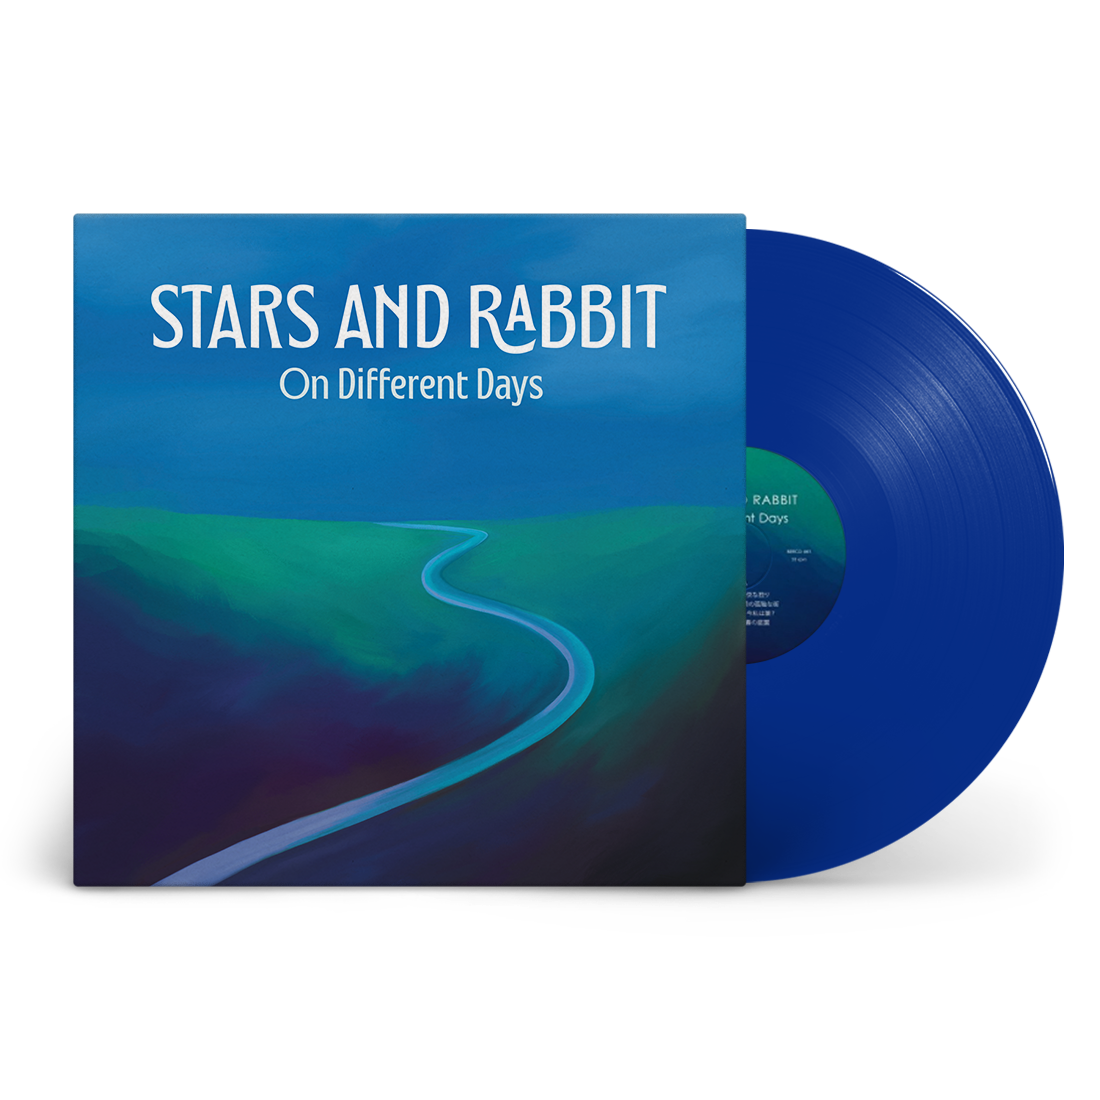 Stars and Rabbit - On Different Days: Exclusive Blue Moon Vinyl LP + Signed Art Print